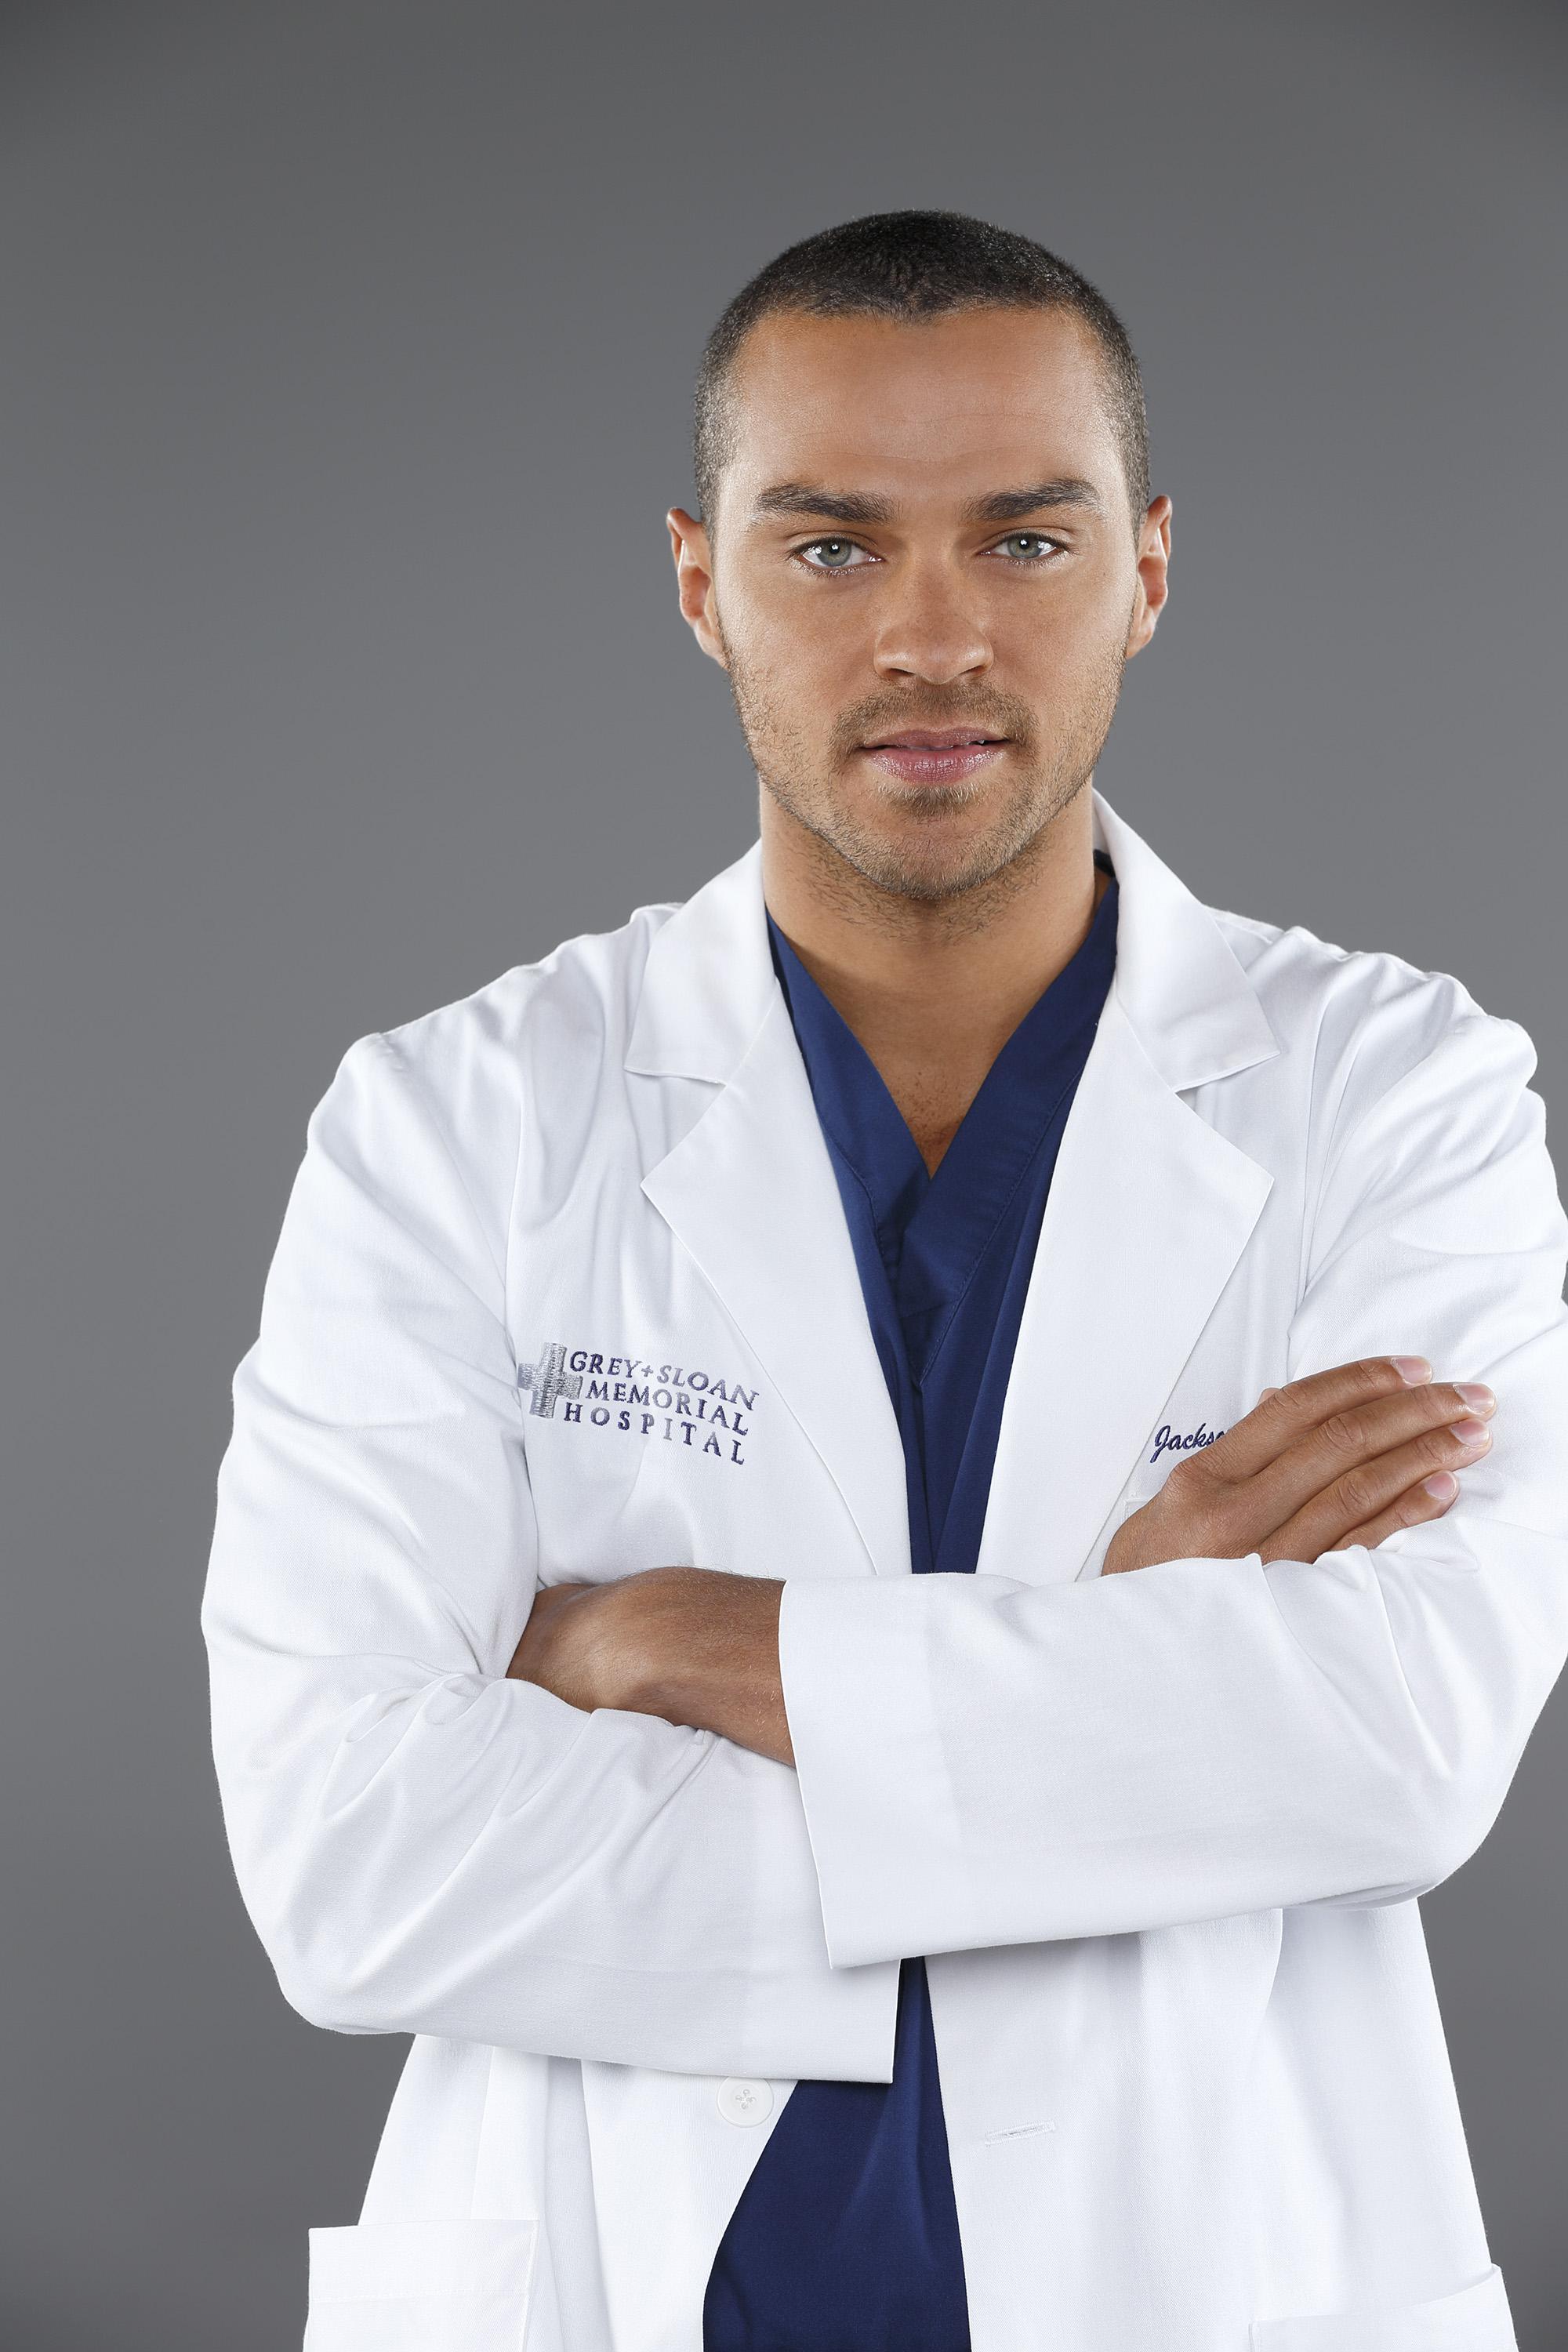 Grey's Anatomy Seasons 10 and 11 Promo Picture